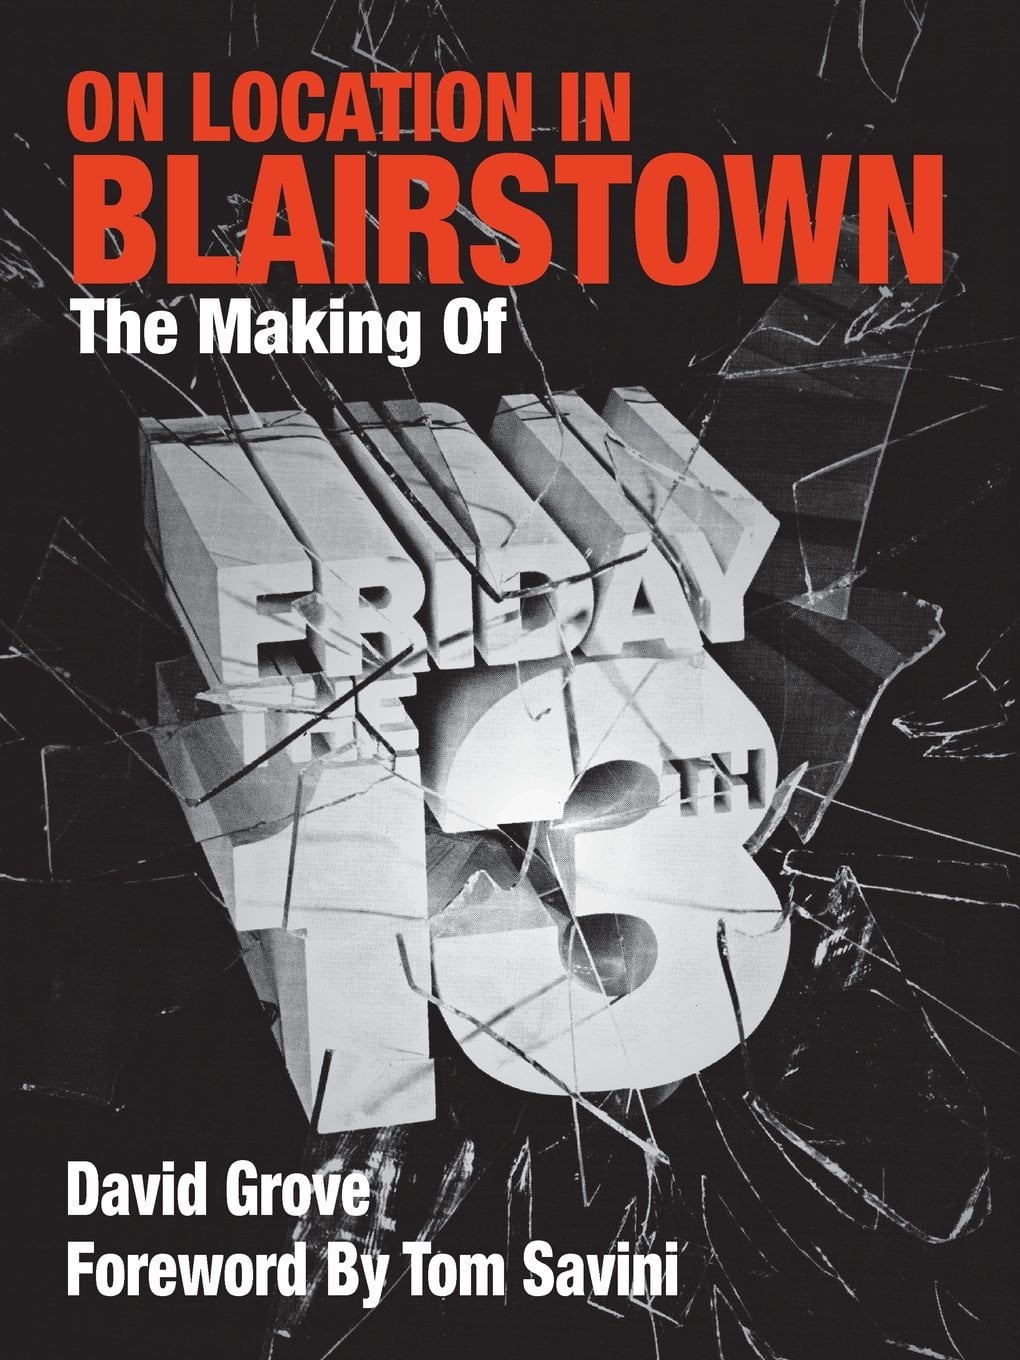 On Location in Blairstown: The Making of Friday the 13th book cover